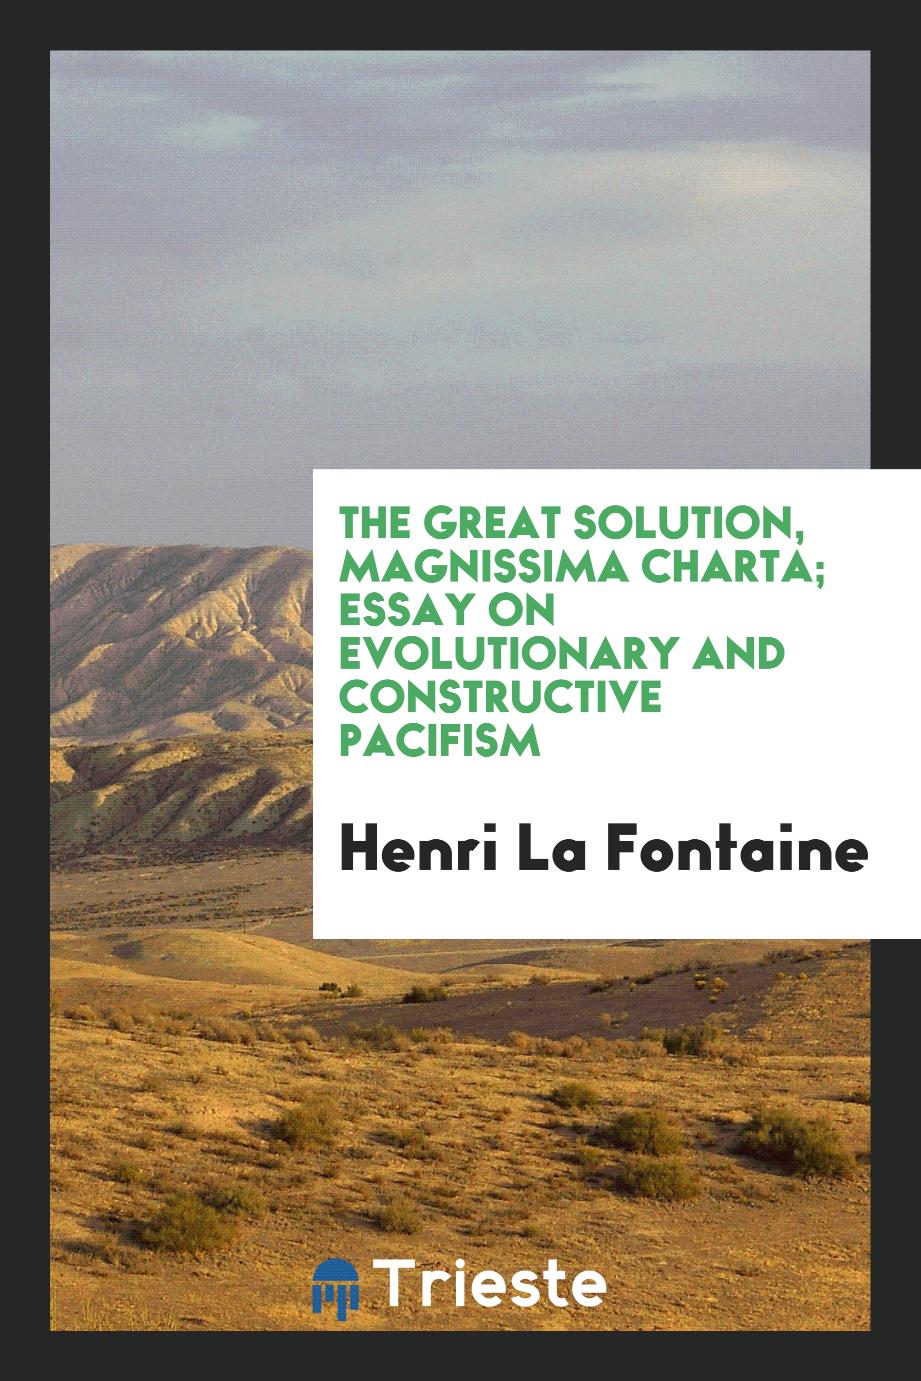 The great solution, magnissima charta; essay on evolutionary and constructive pacifism